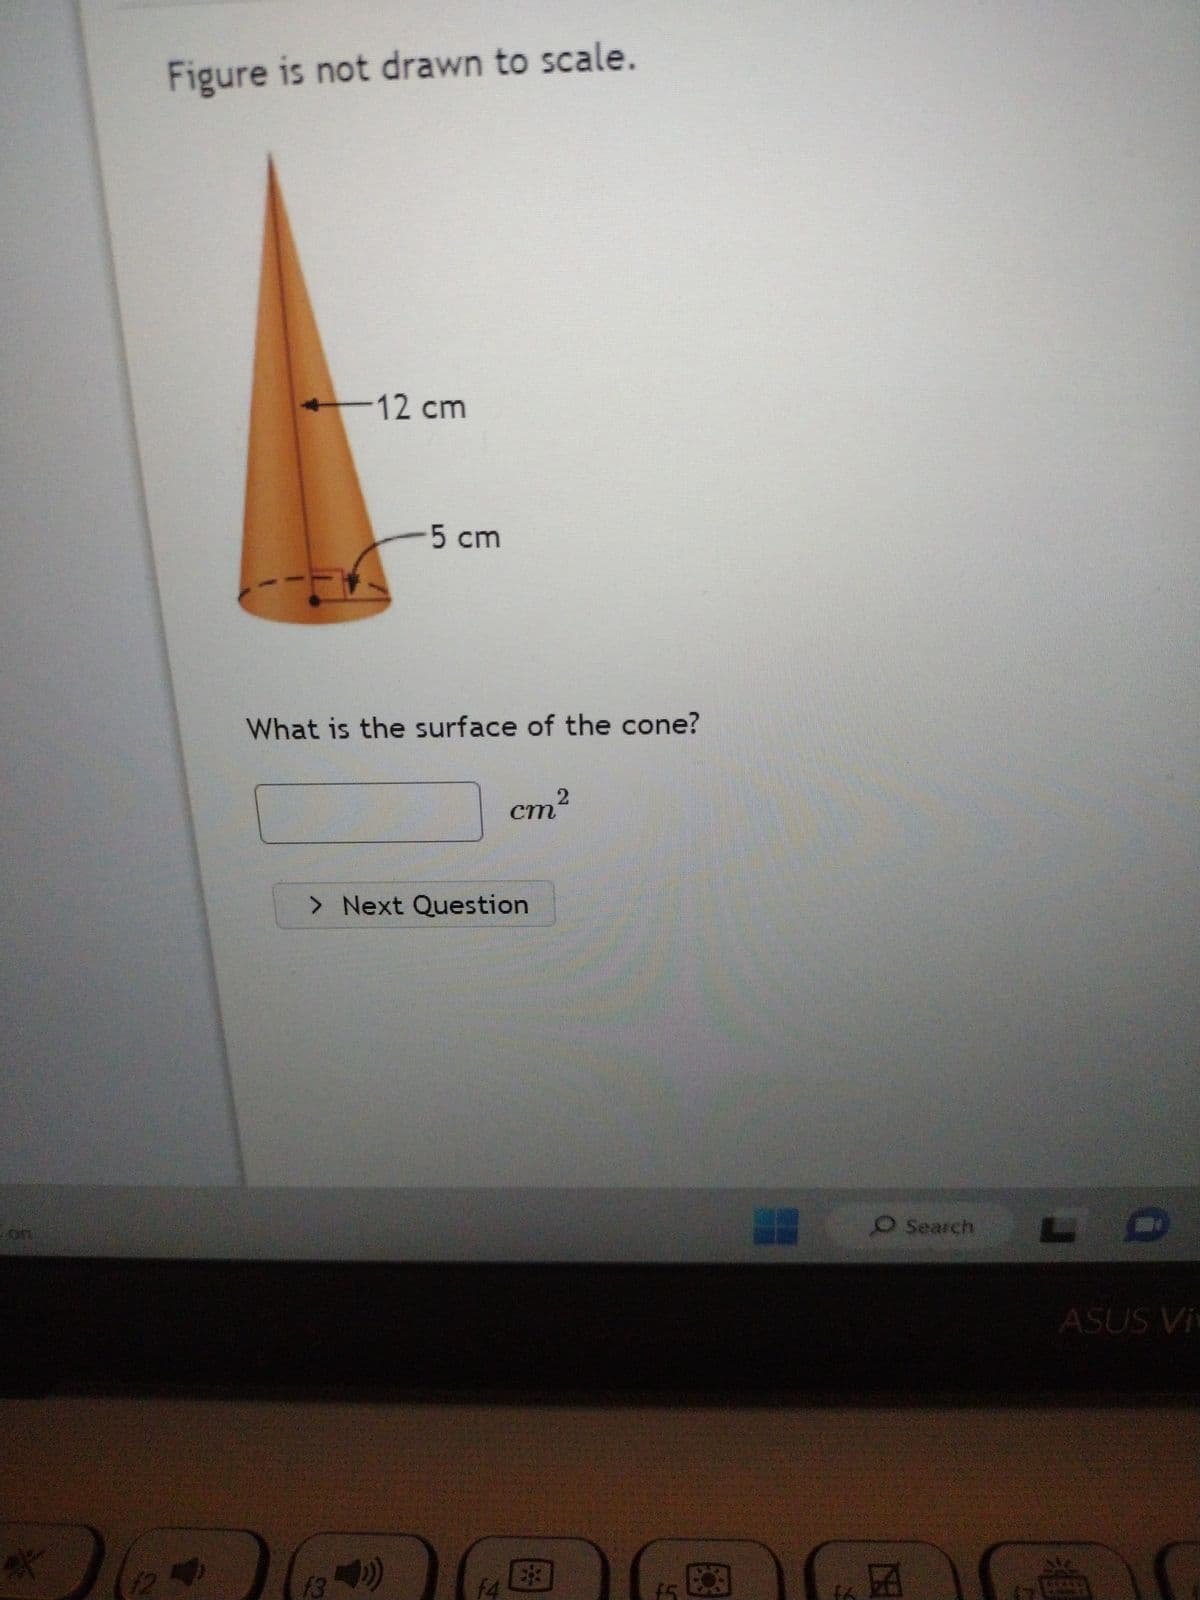 of
12
Figure is not drawn to scale.
-12 cm
What is the surface of the cone?
13
5 cm
> Next Question
))
2
cm²
f4
*
(5
## O Search
CE
ASUS Vi